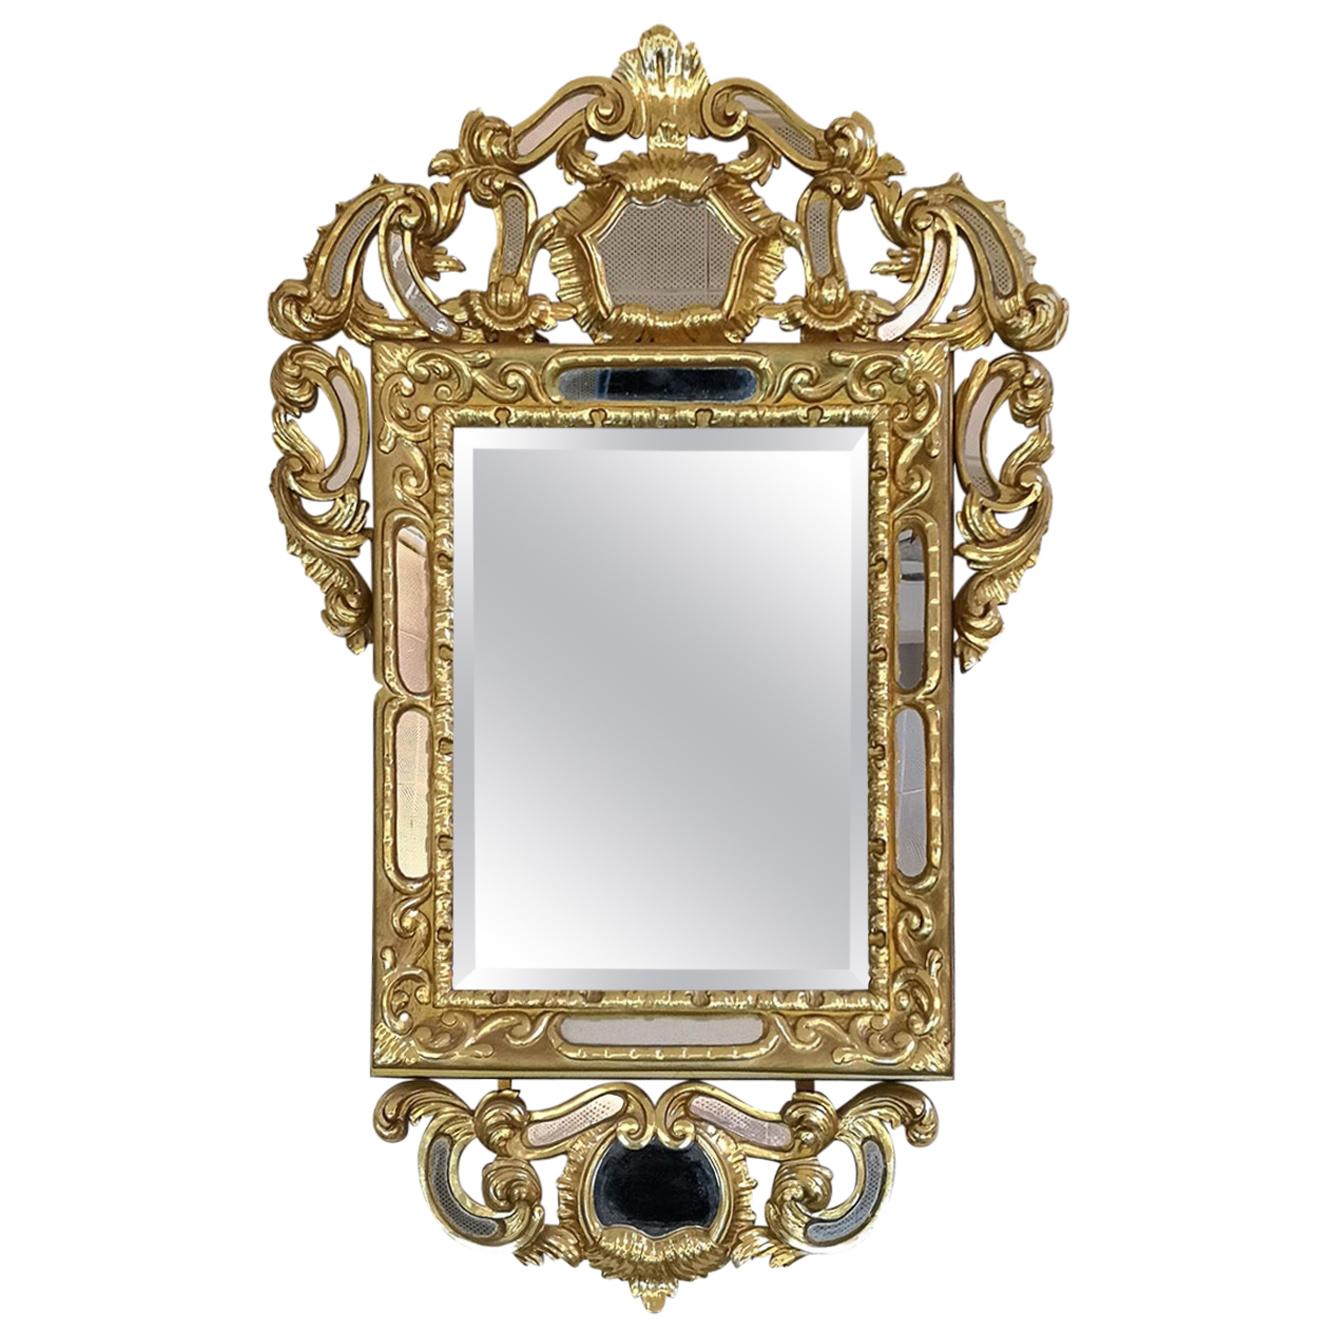 Hand Carved Gold-Plated Wooden Mirror, 19th Century